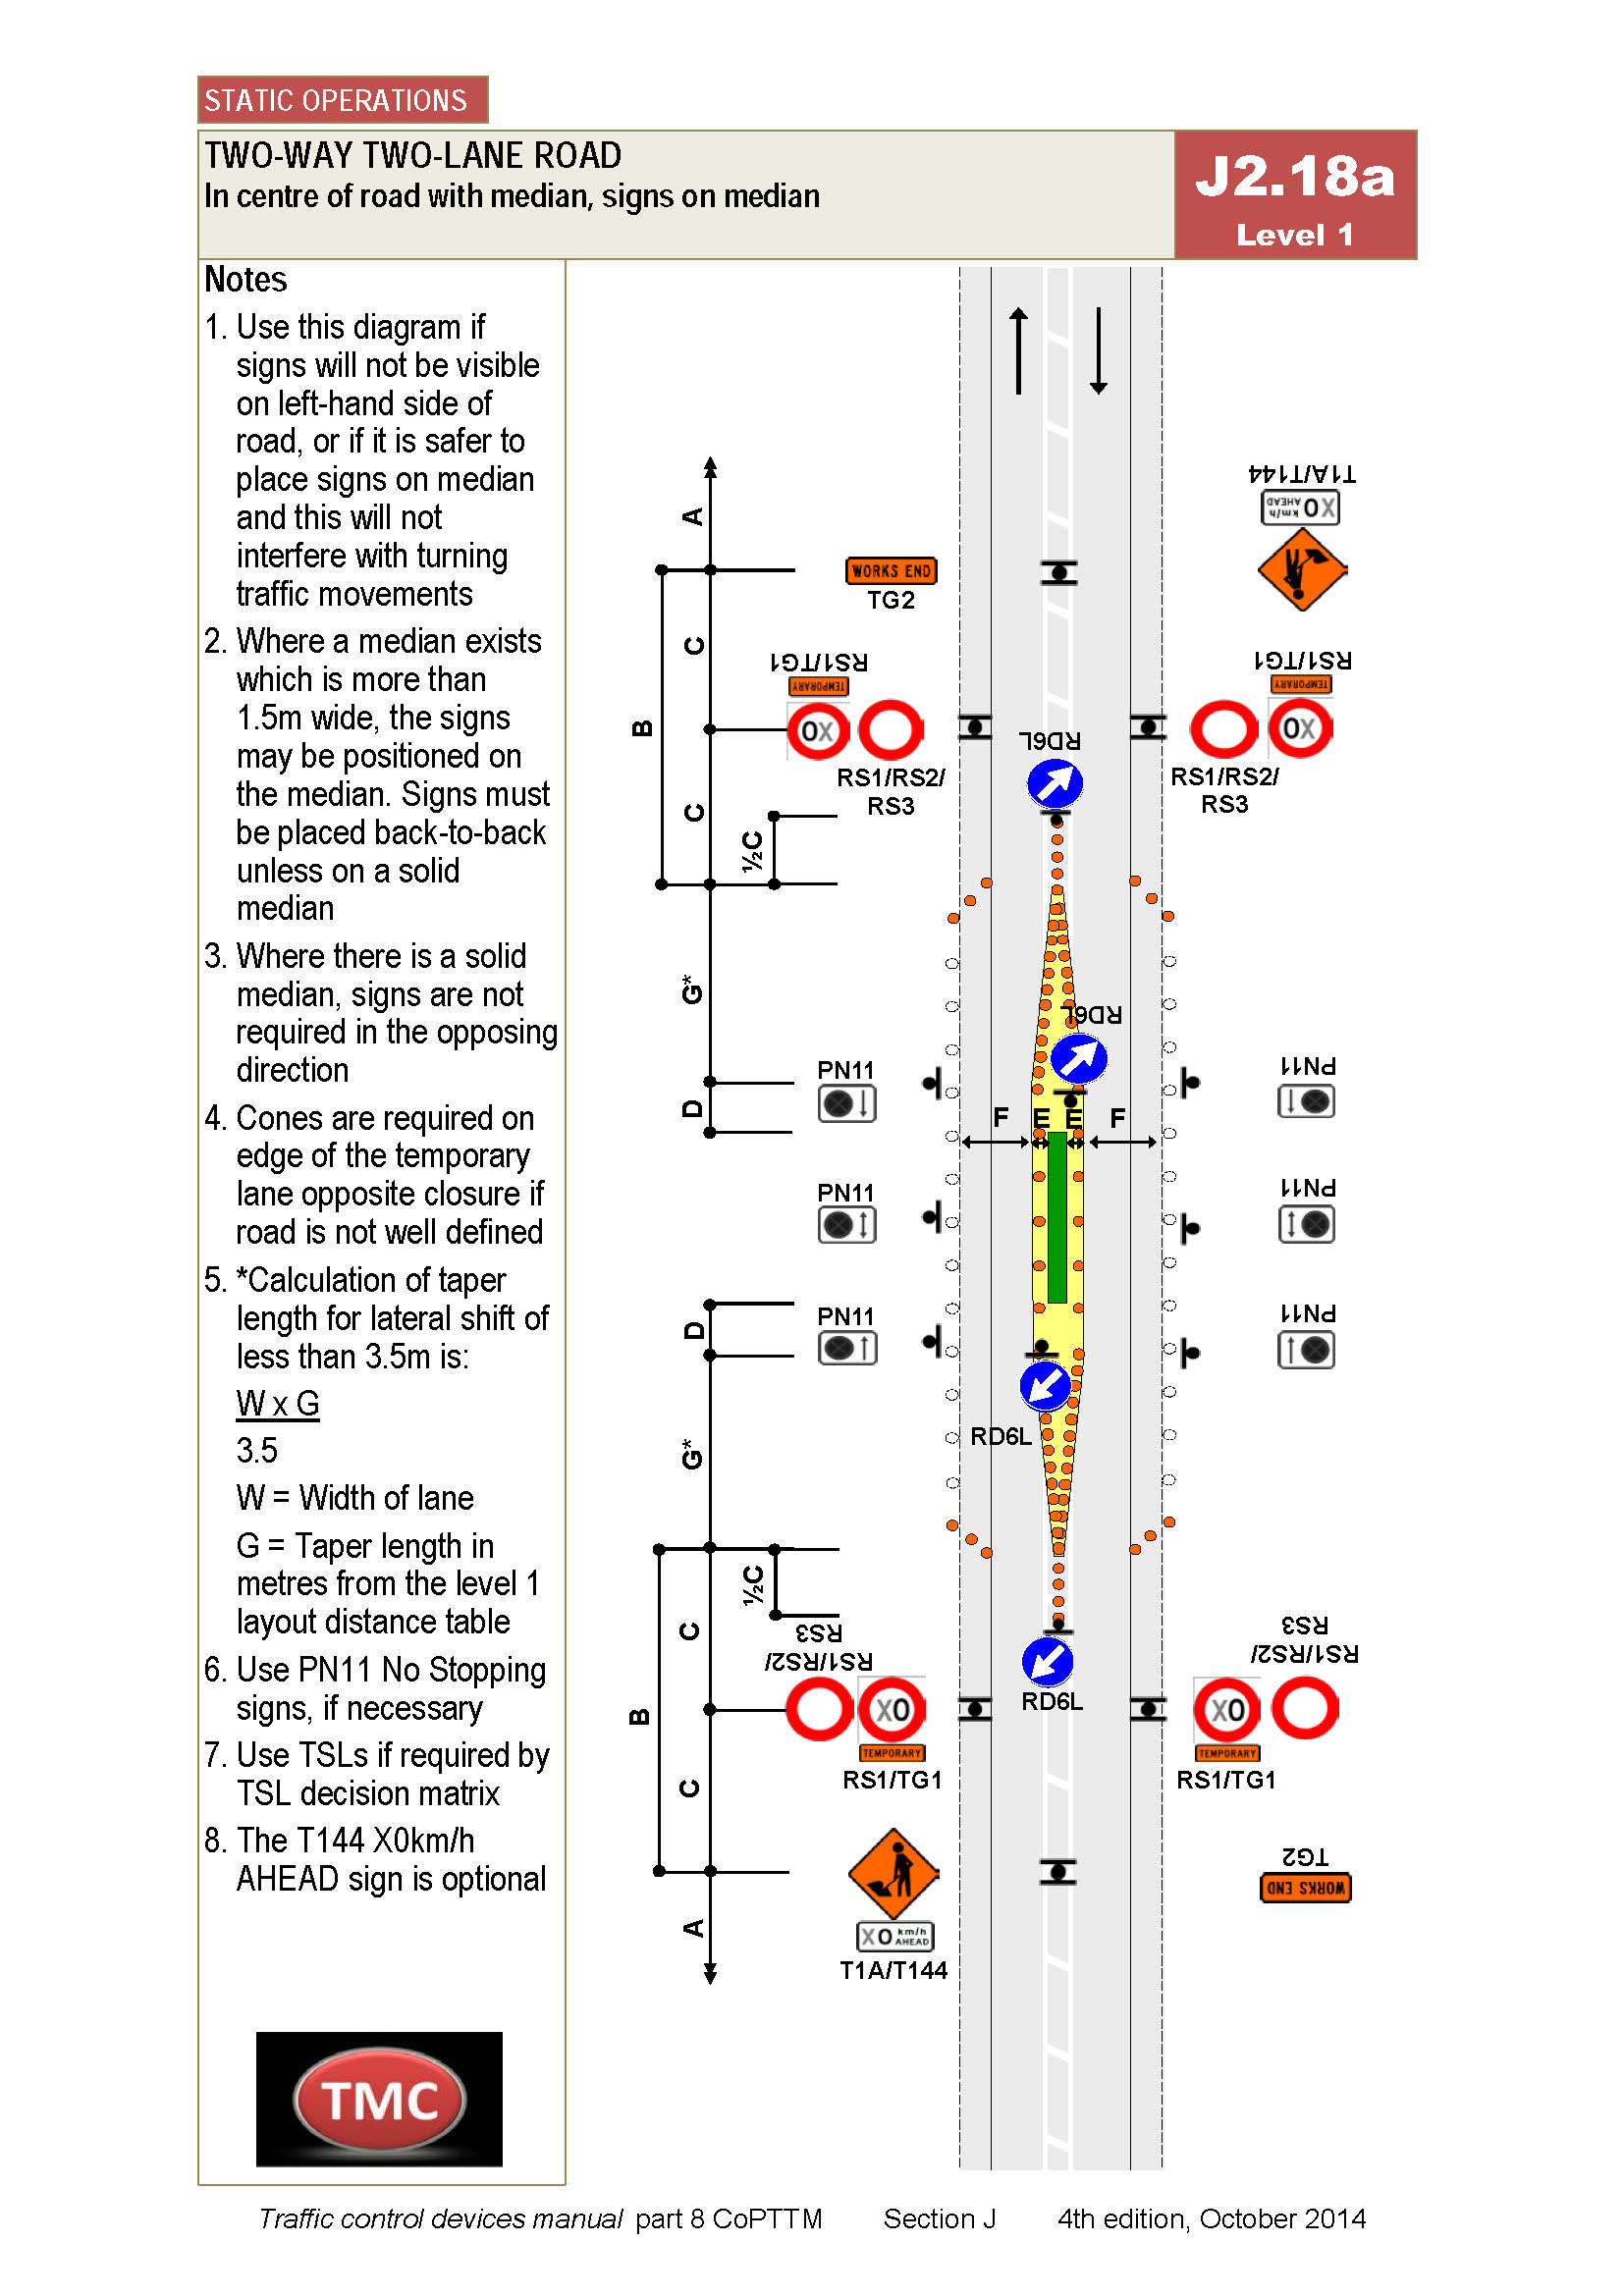 Traffic control manual for work on roadways